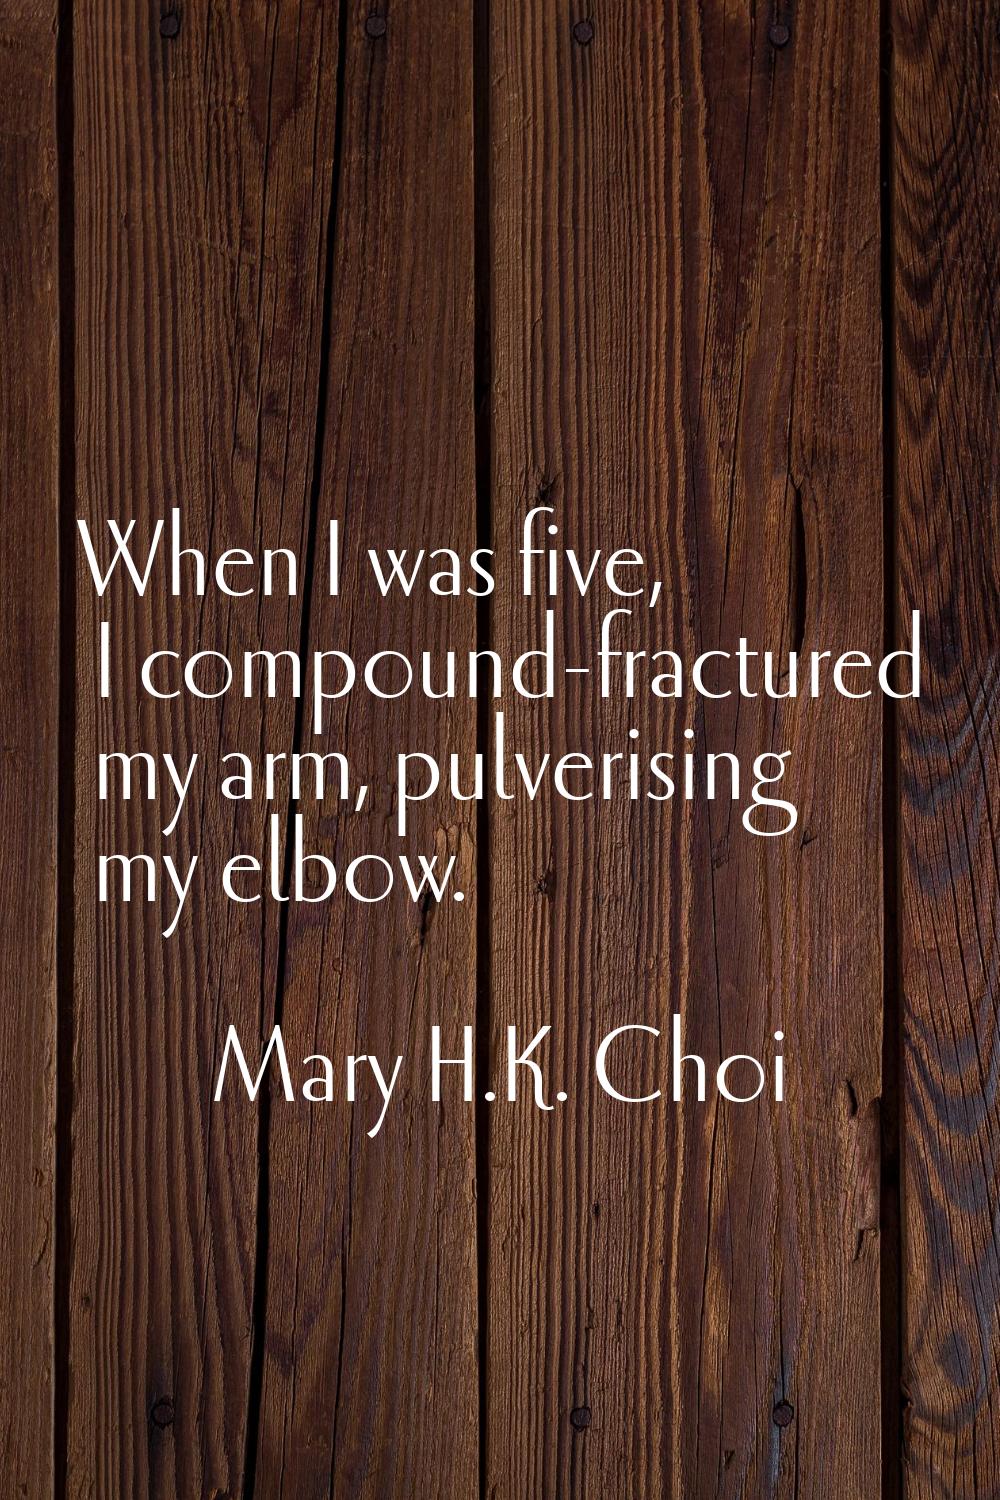 When I was five, I compound-fractured my arm, pulverising my elbow.